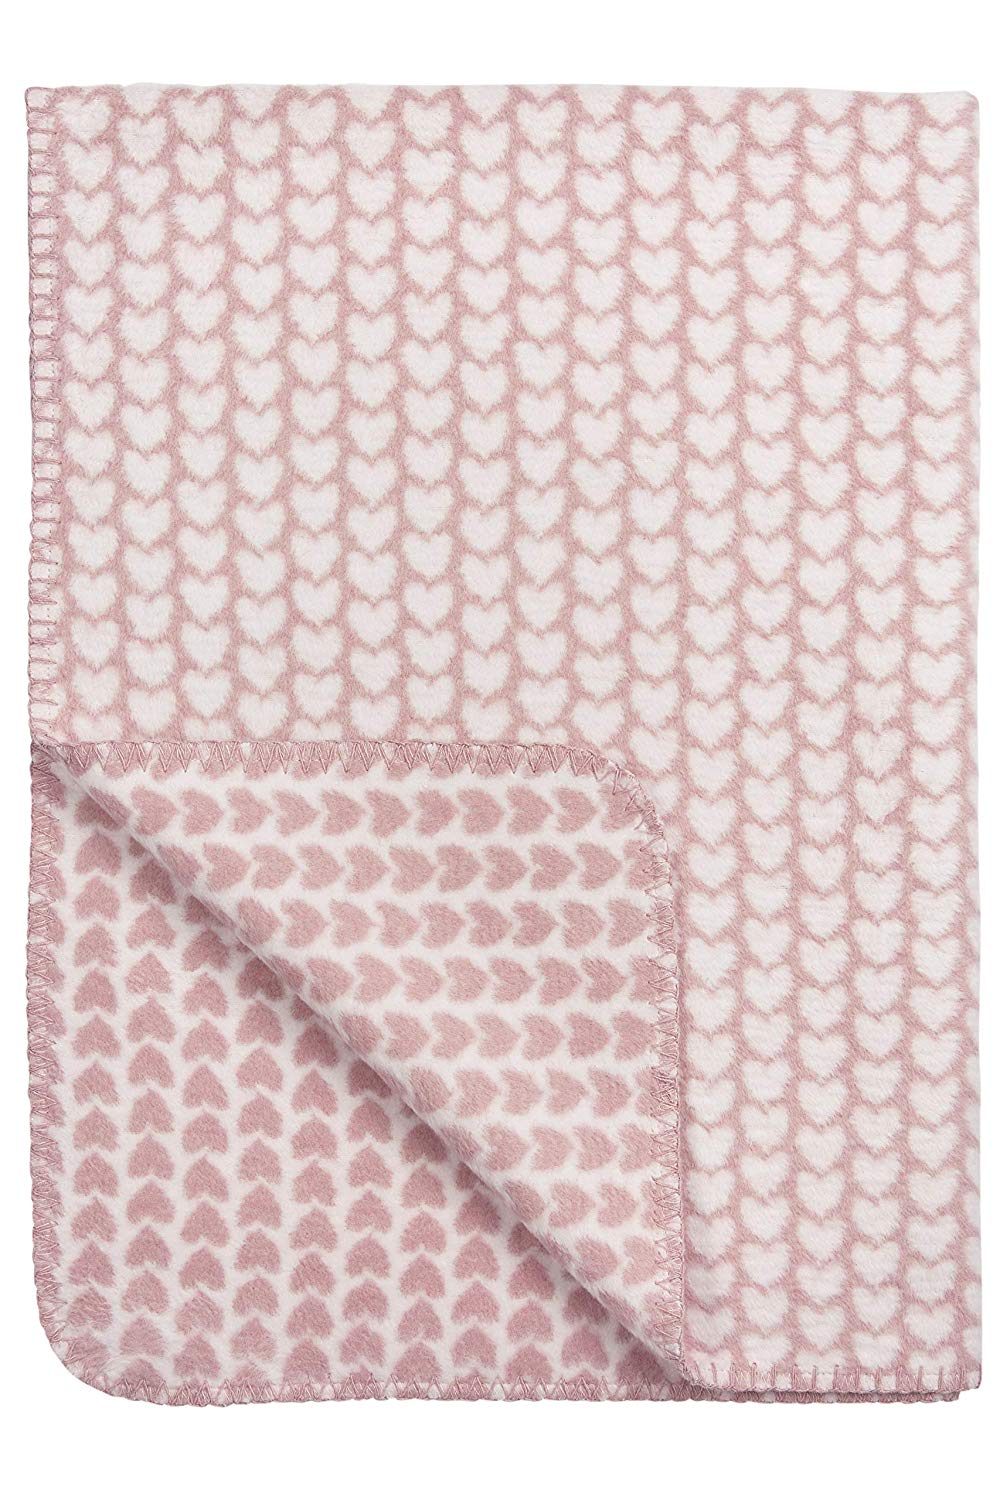 Meyco Knitted Heart 1531026 Baby Blanket 75 x 100 cm Pink